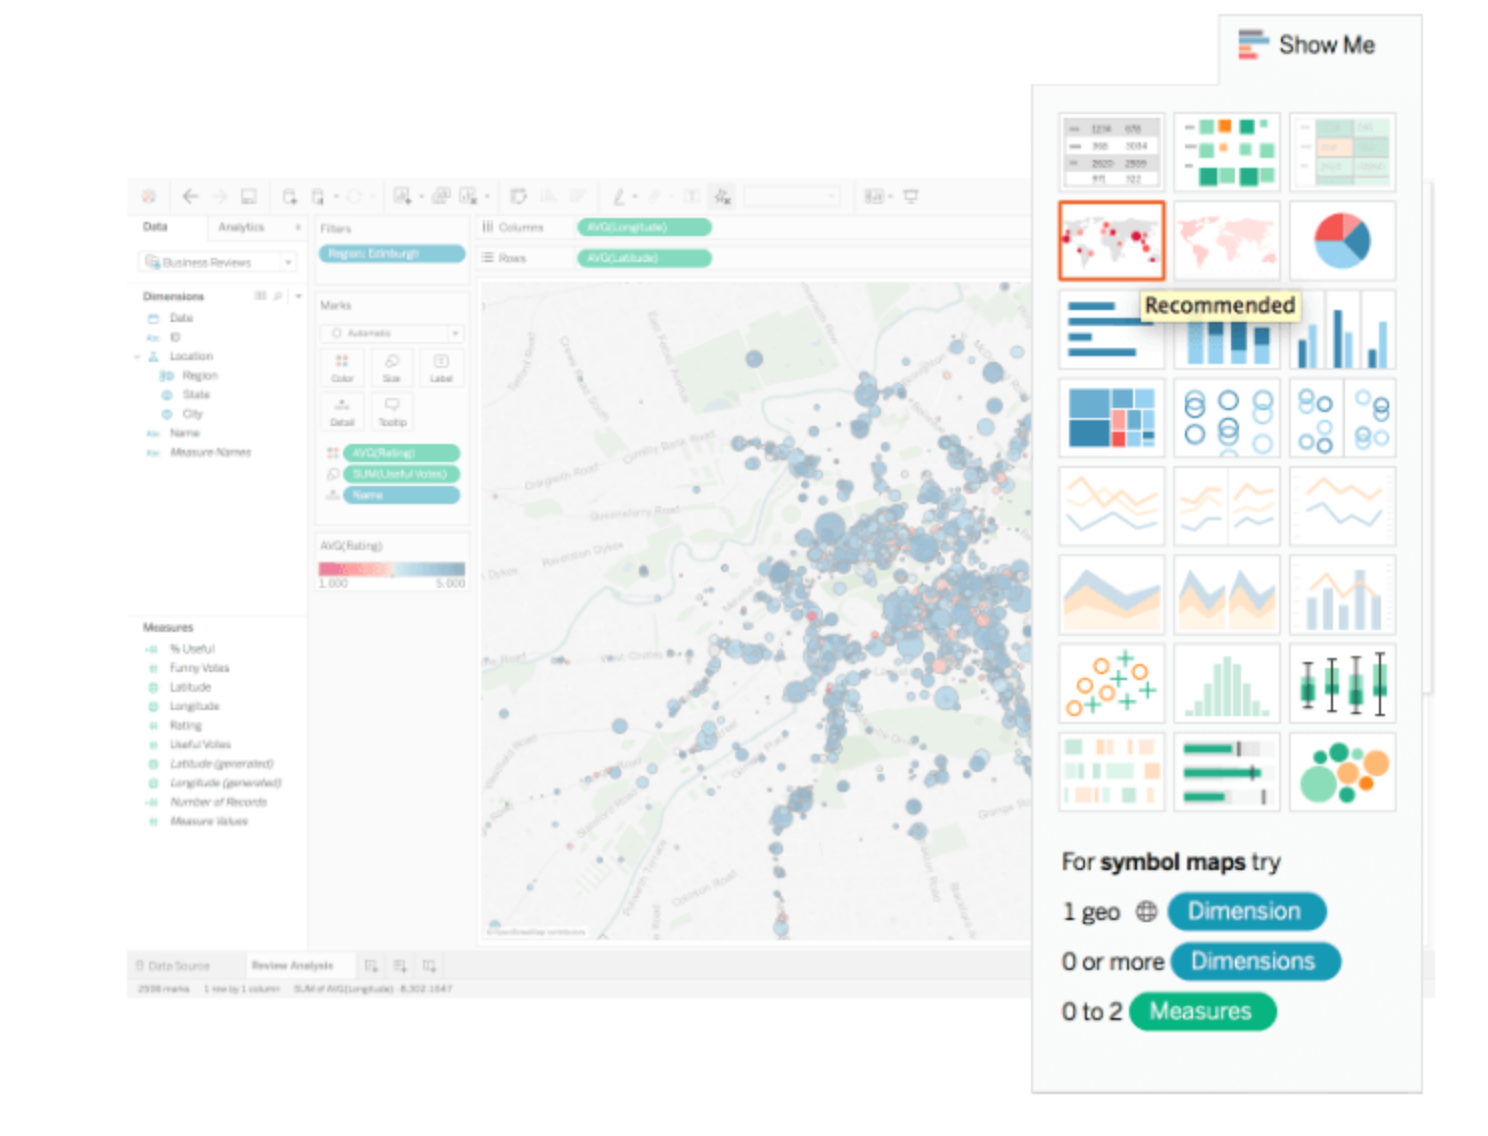 Tableau is one of the market leaders in data visualization